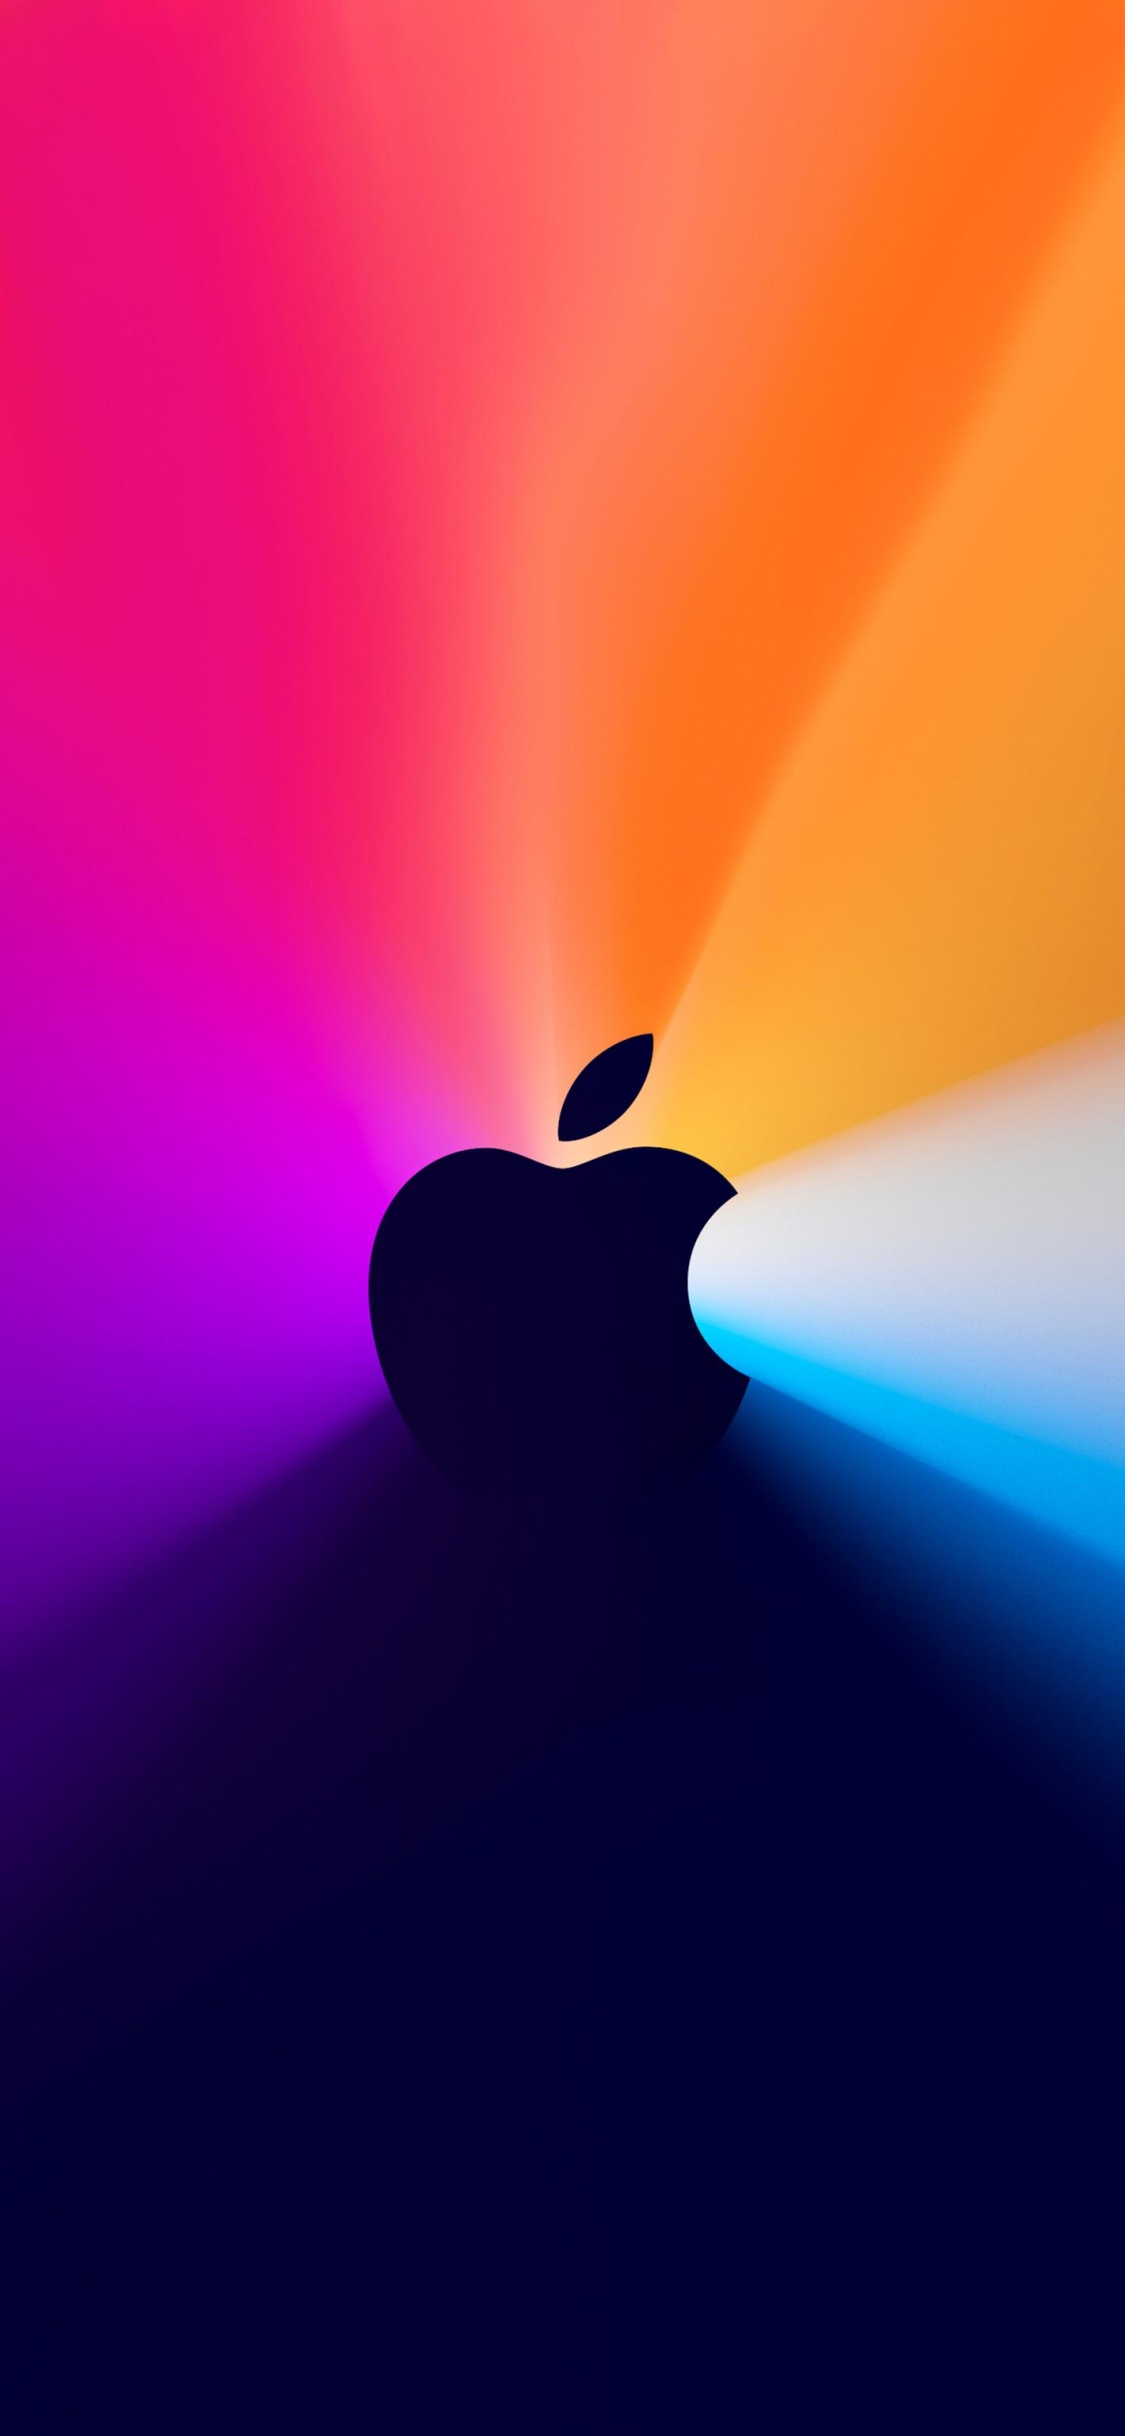 Apple, IPhone, Apples, One More Thing, Homepod. Wallpaper in 1125x2436 Resolution